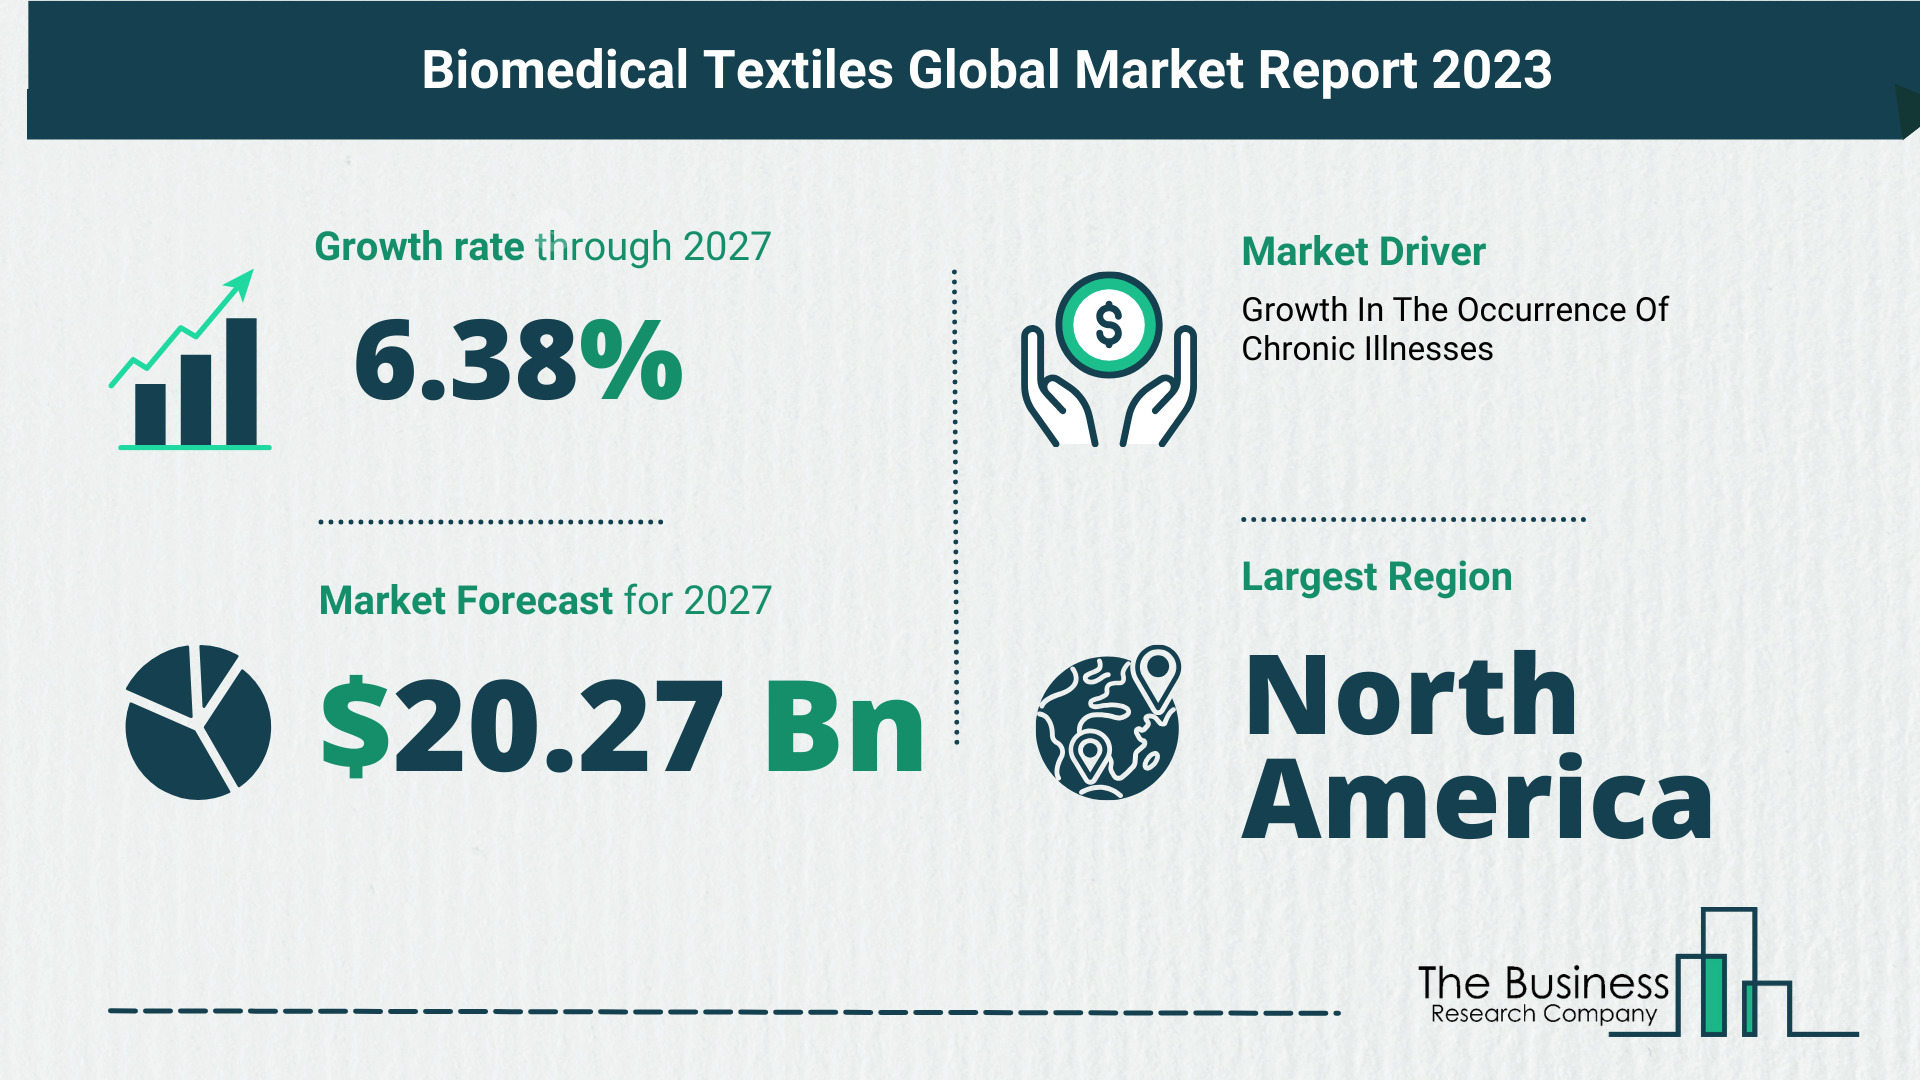 What Is The Forecast Growth Rate For The Biomedical Textiles Market?